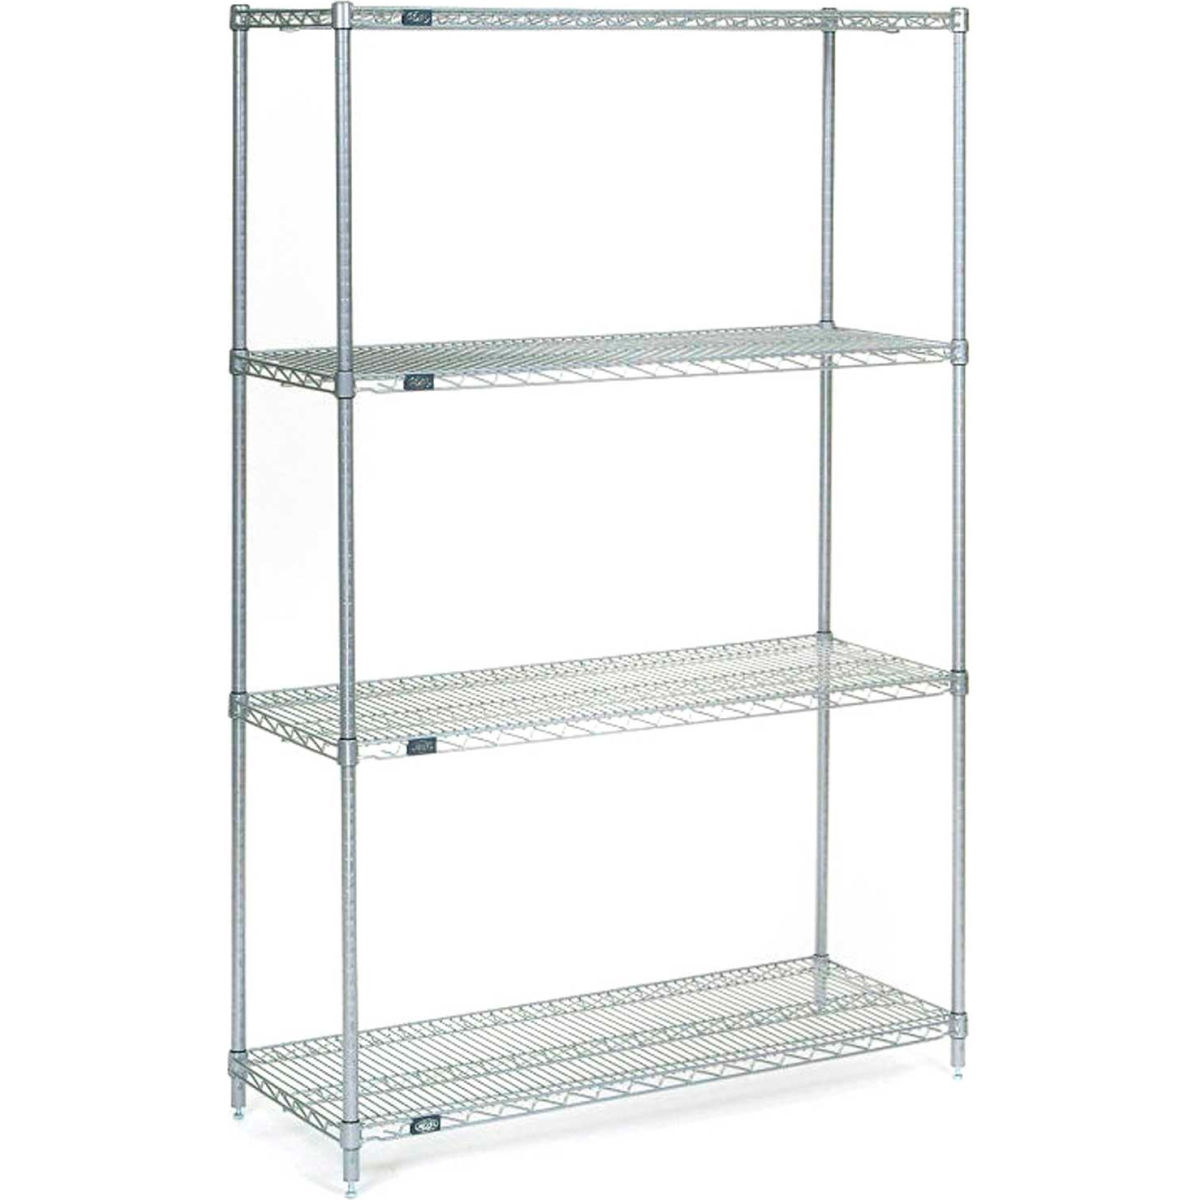 Picture of Global Industrial 14248S5 86 x 24 x 14 in. Nexel Stainless Steel Starter 5 Tier Wire Shelving